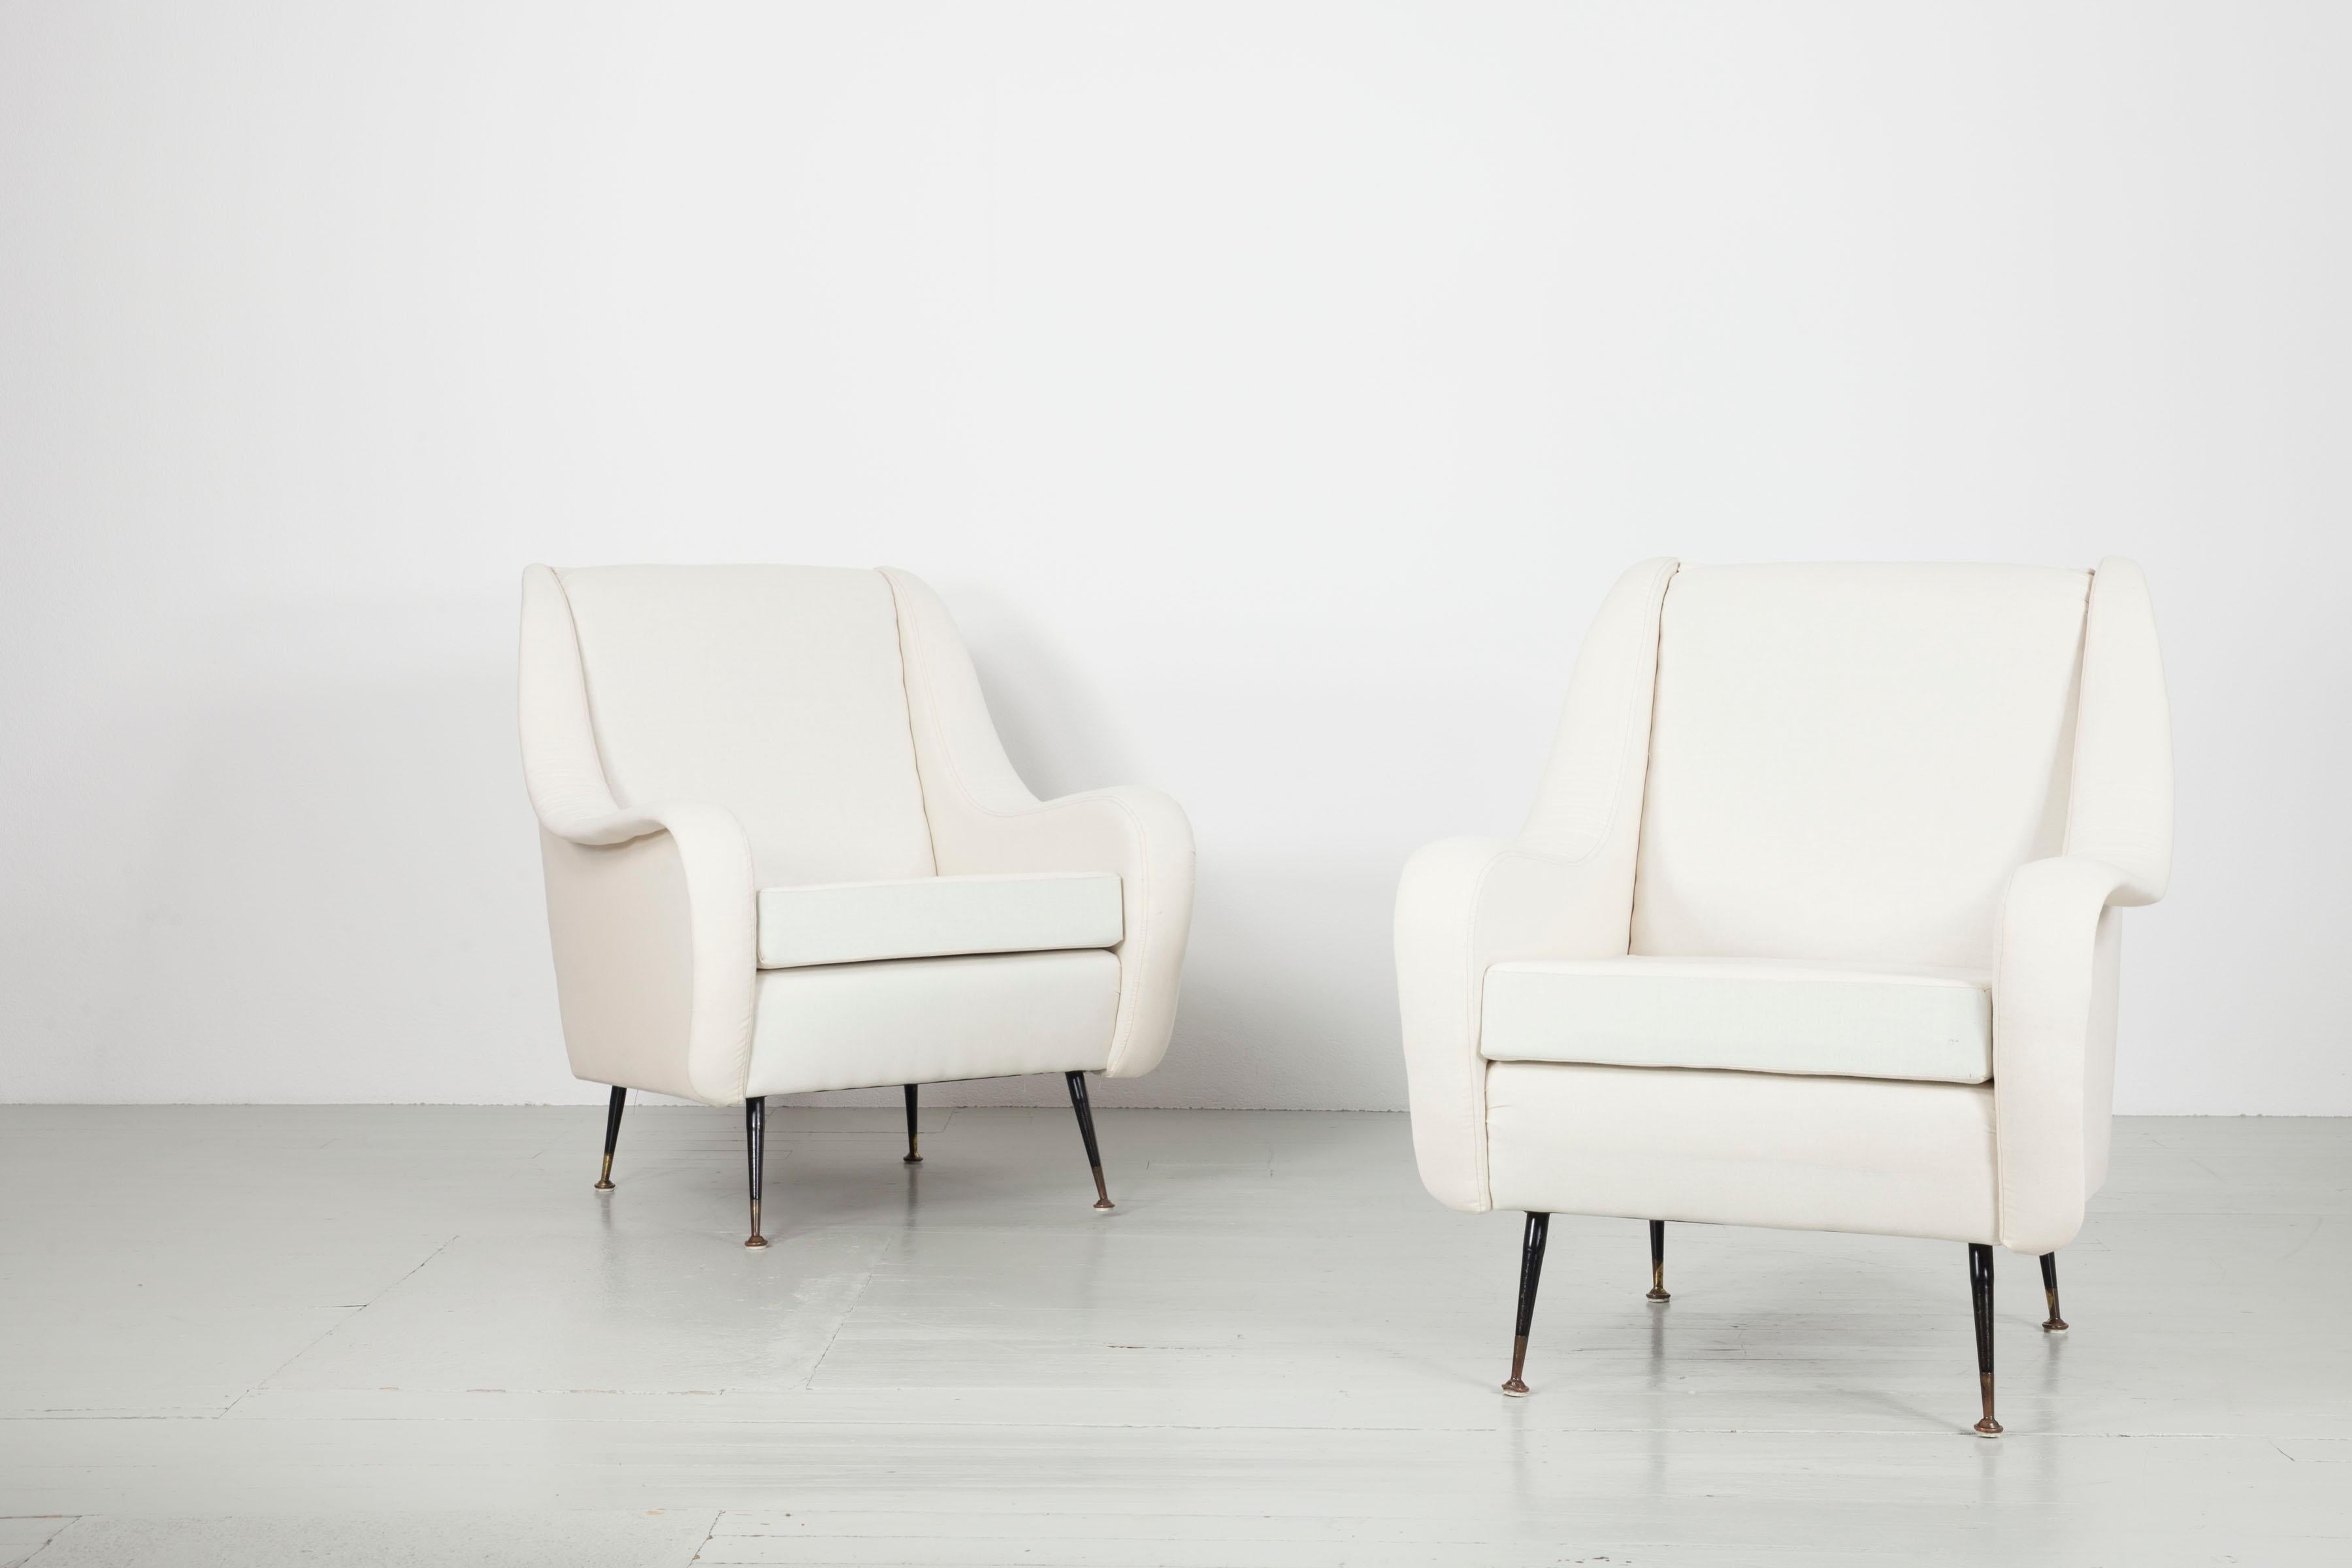 Pair of Armchairs of Italy in 1950s. This design features dominant armrests which define the side lines of the pieces. The Armchairs rest on dainty brass bases following classical italian design traditions. The armchairs were upholstered and covered